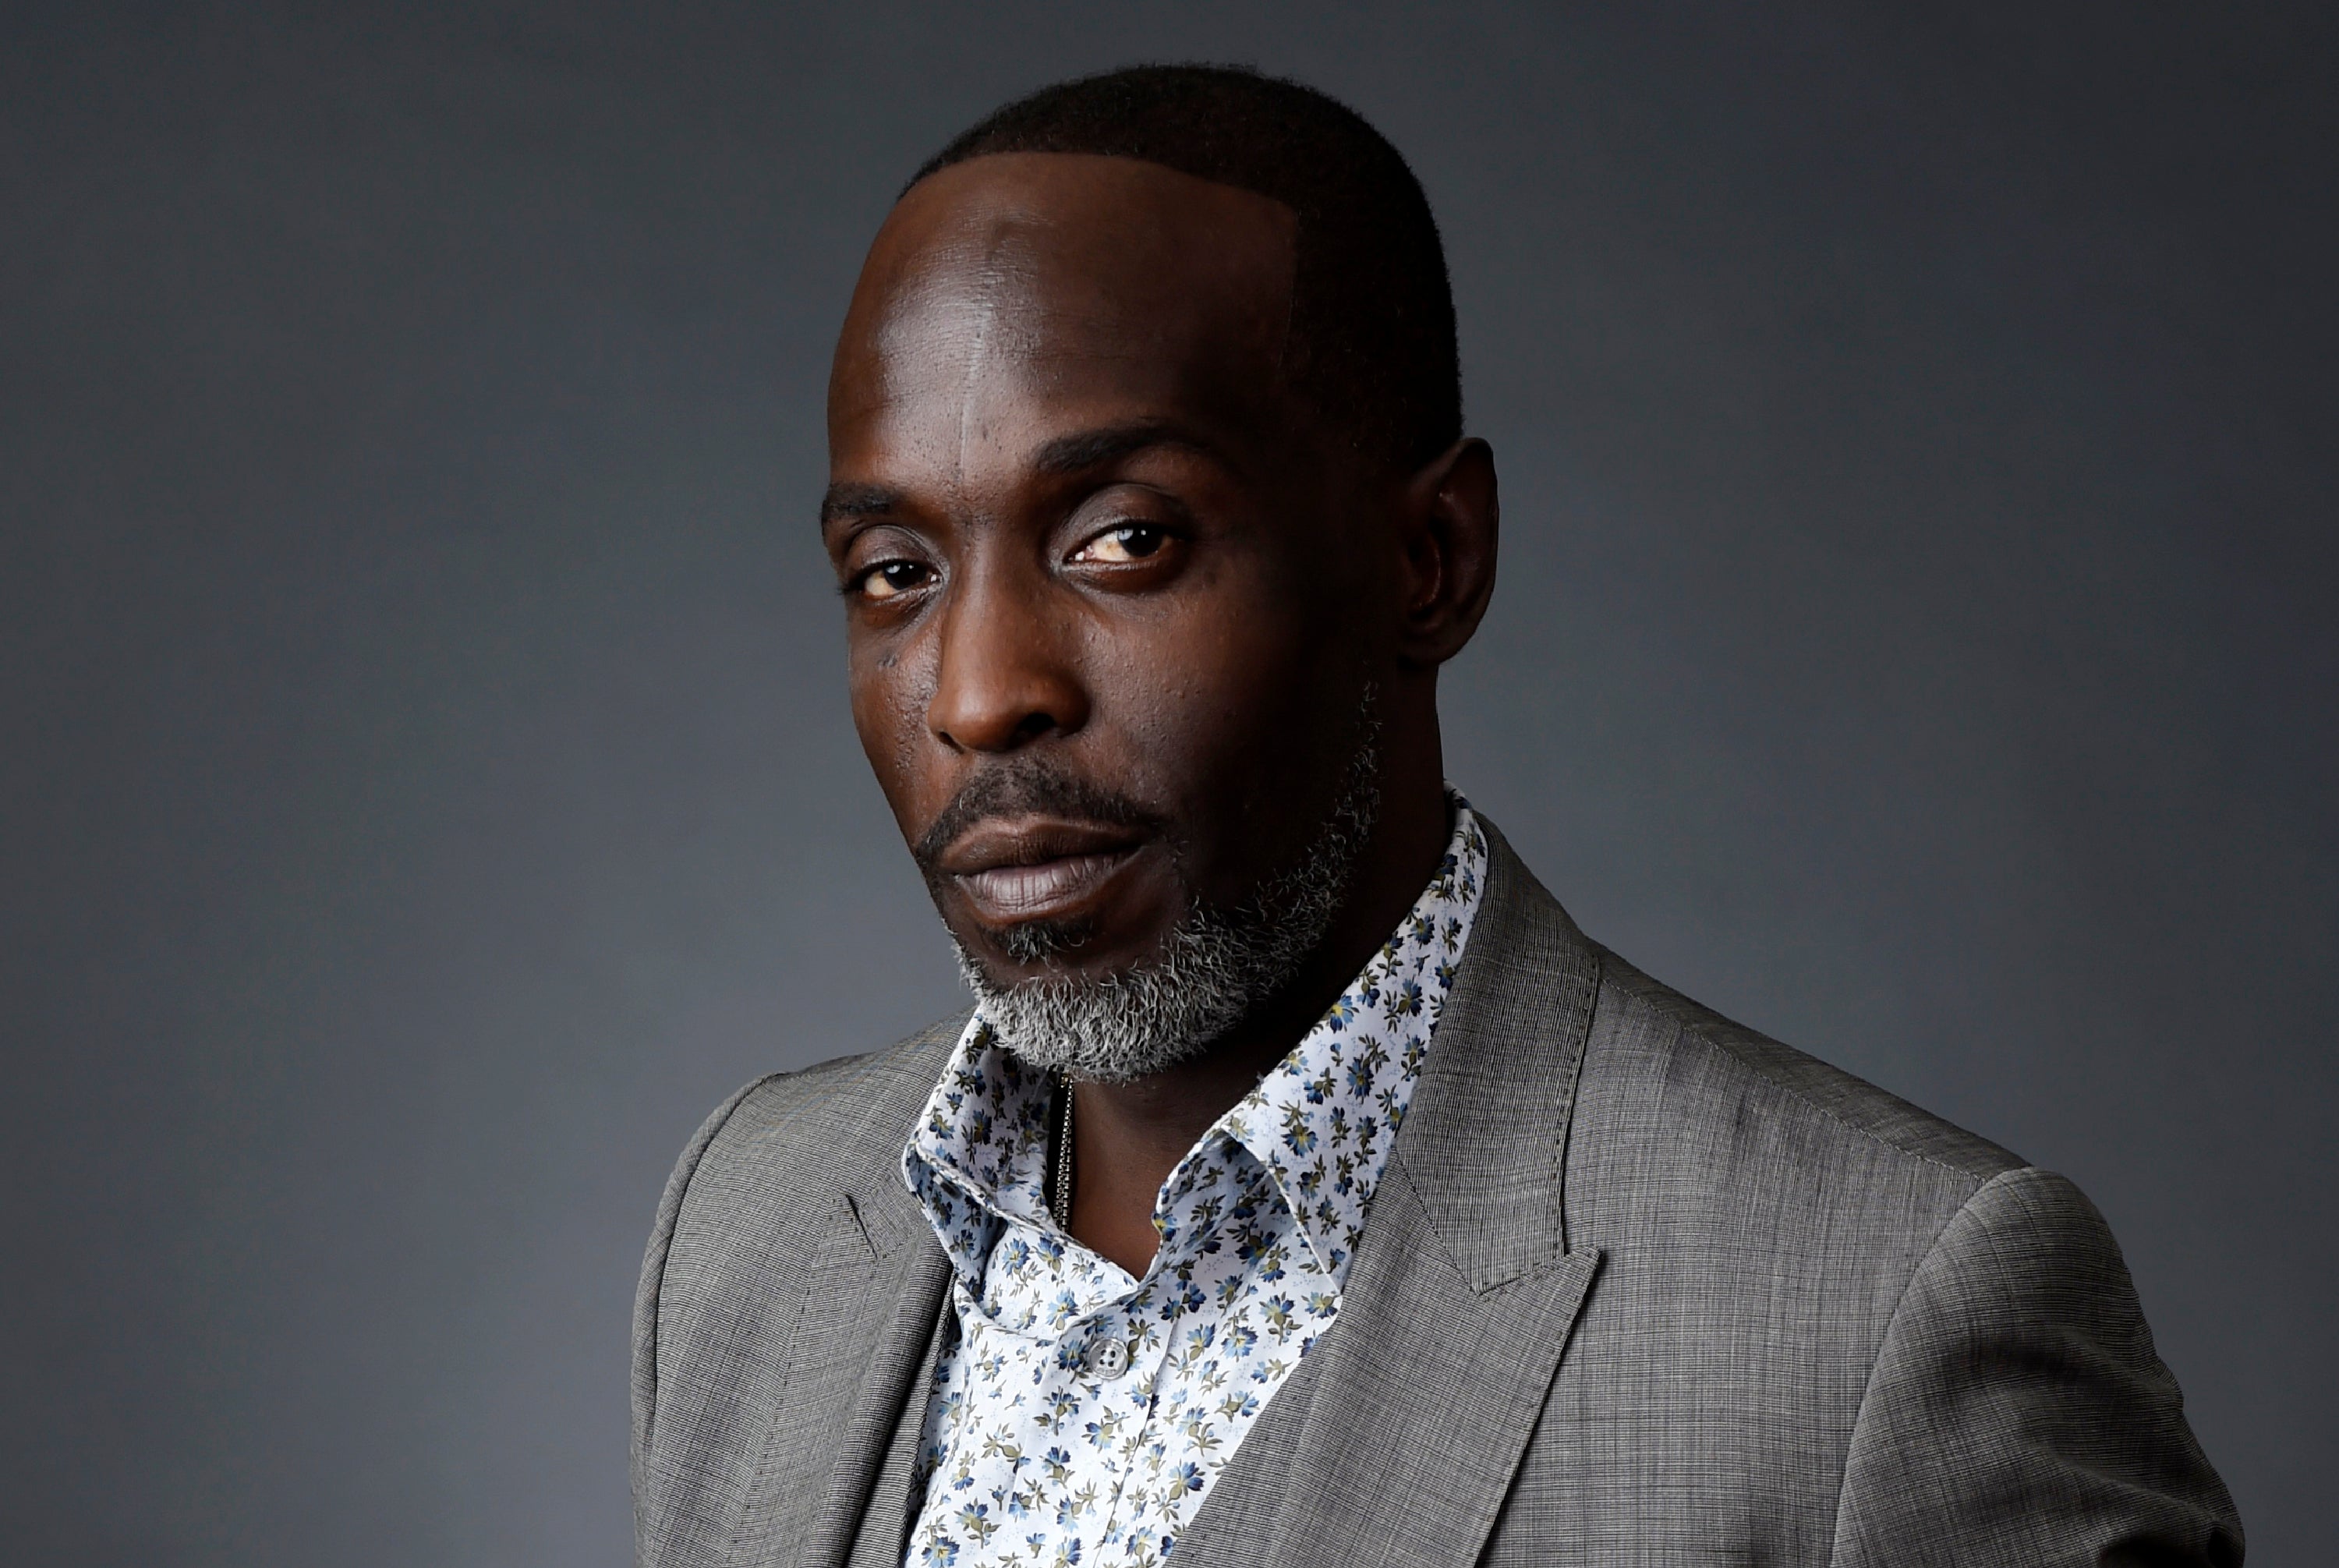 Michael K Williams earned widespread acclaim for his portrayal of Omar Little in The Wire